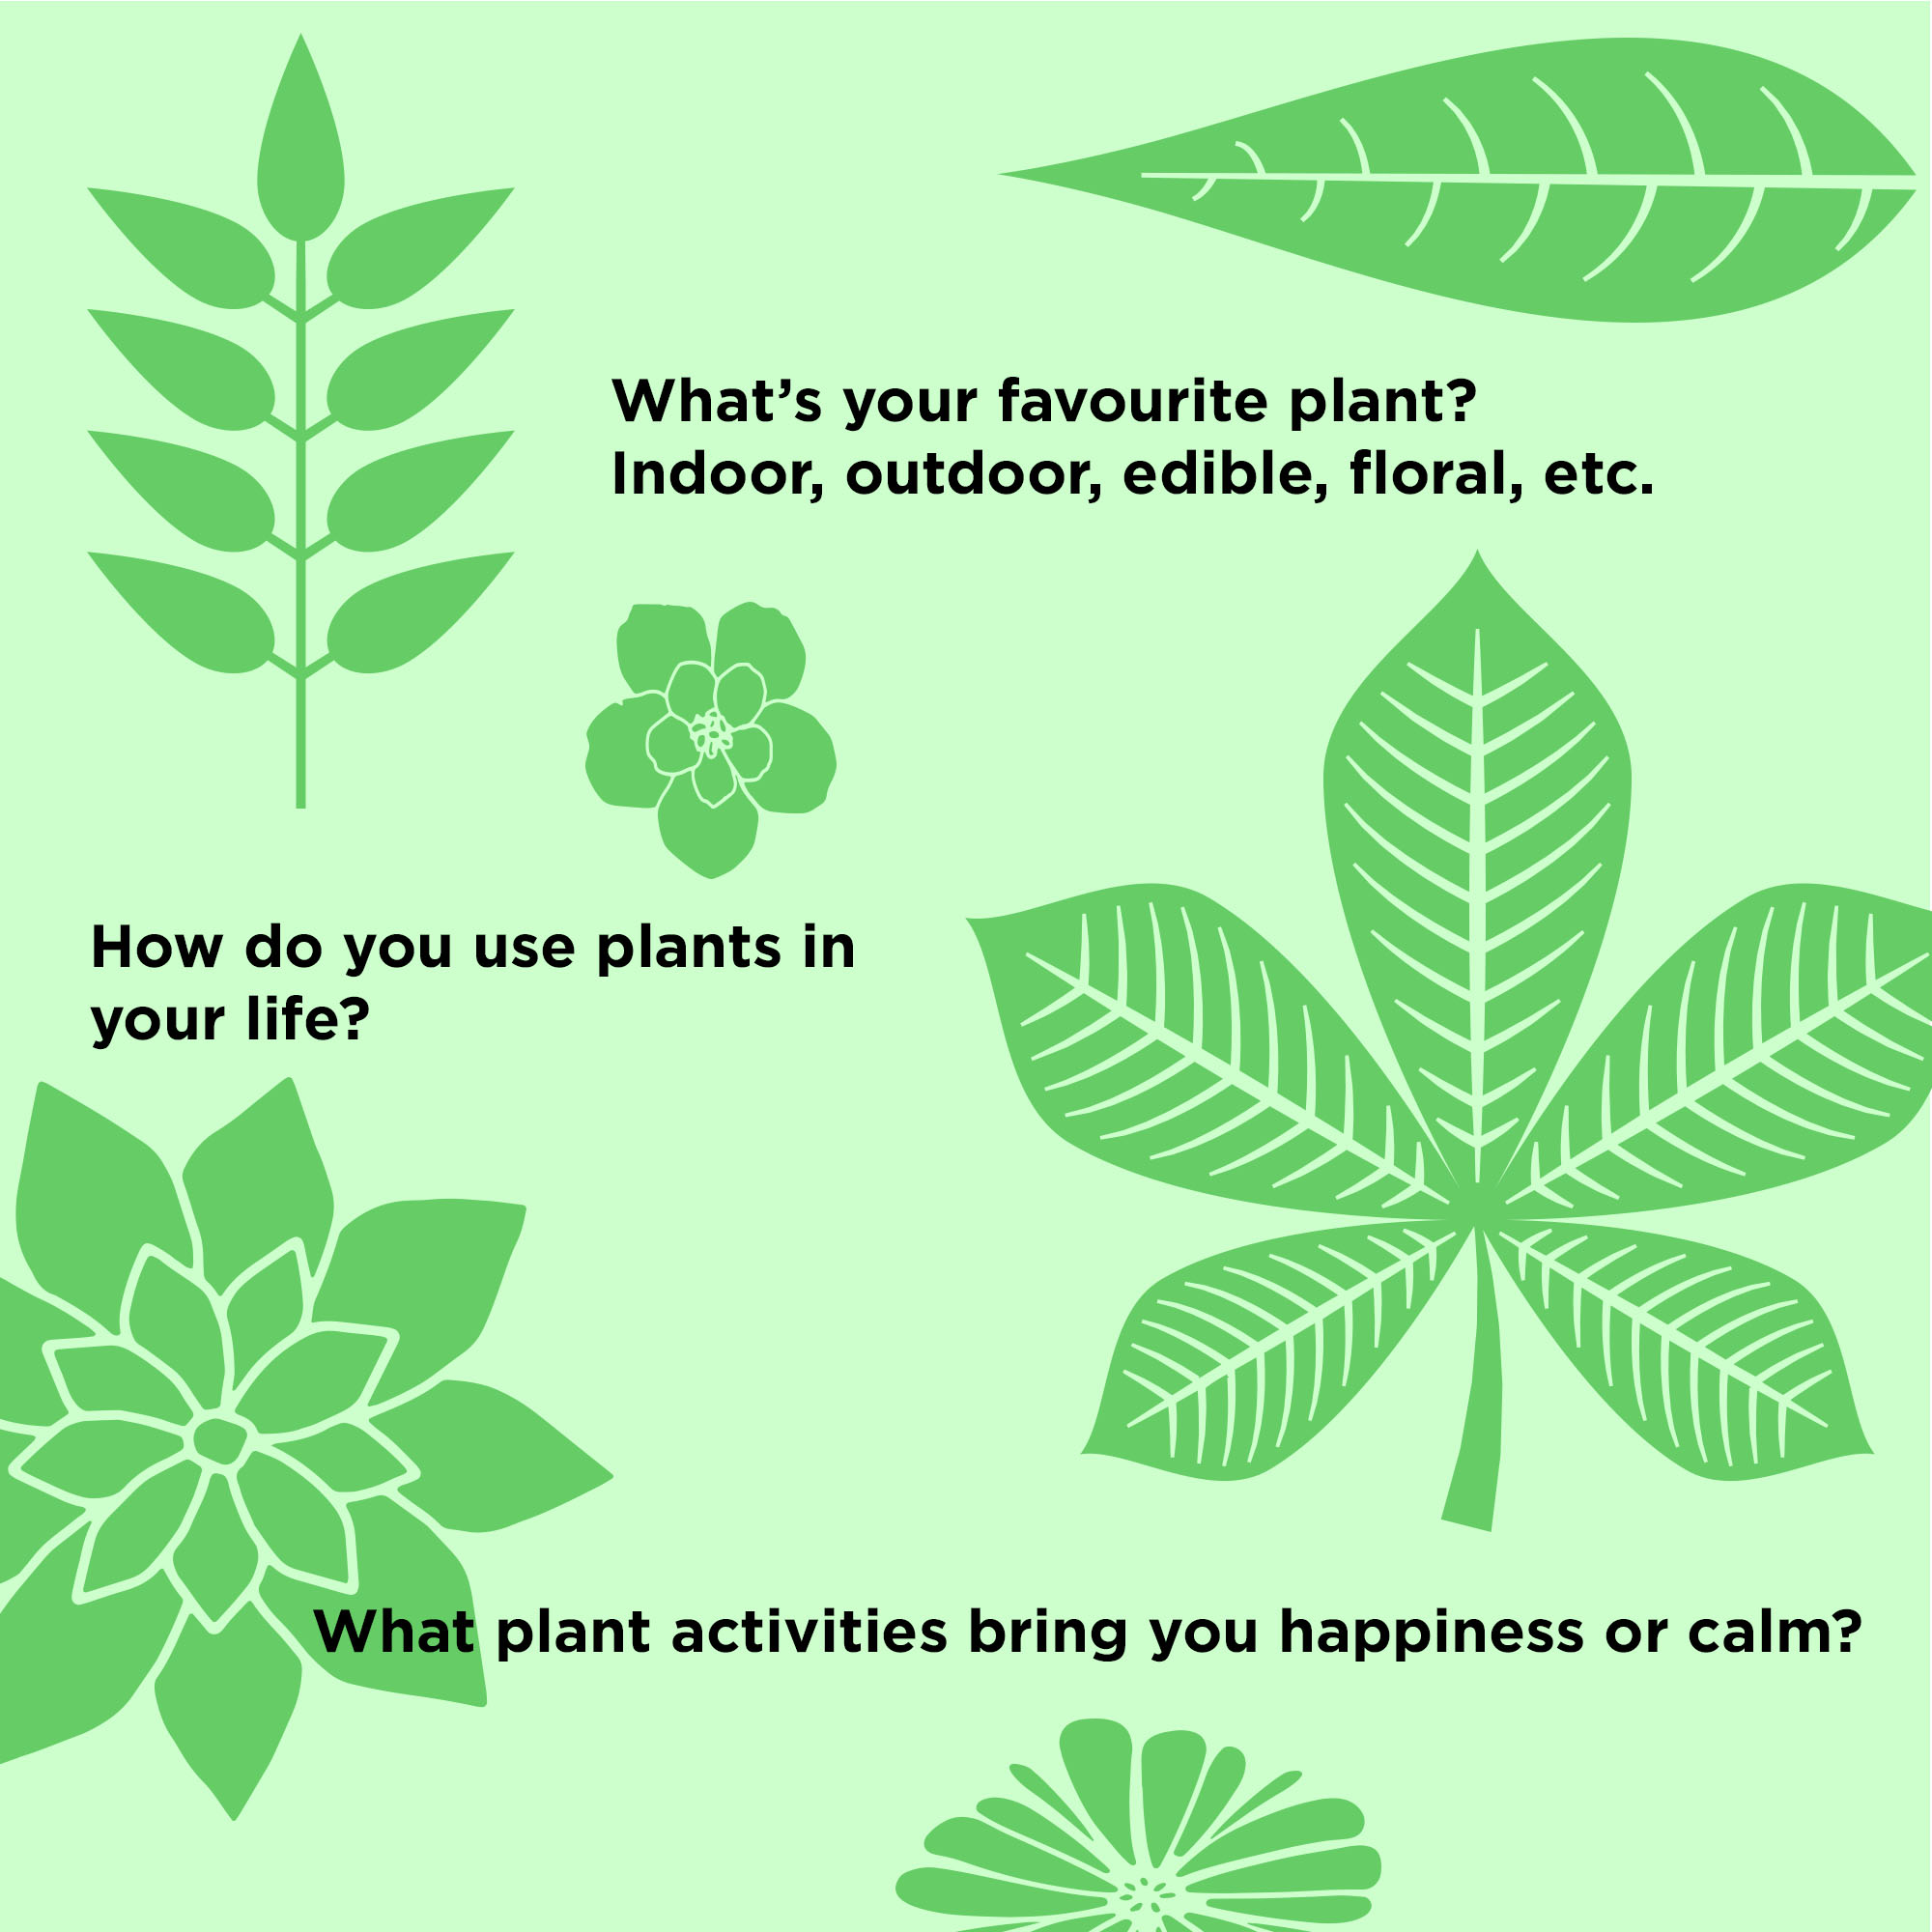 What’s your favourite plant? Indoor, outdoor, edible, floral, etc. How do you use plants in your life? What plant activities bring you happiness or calm?